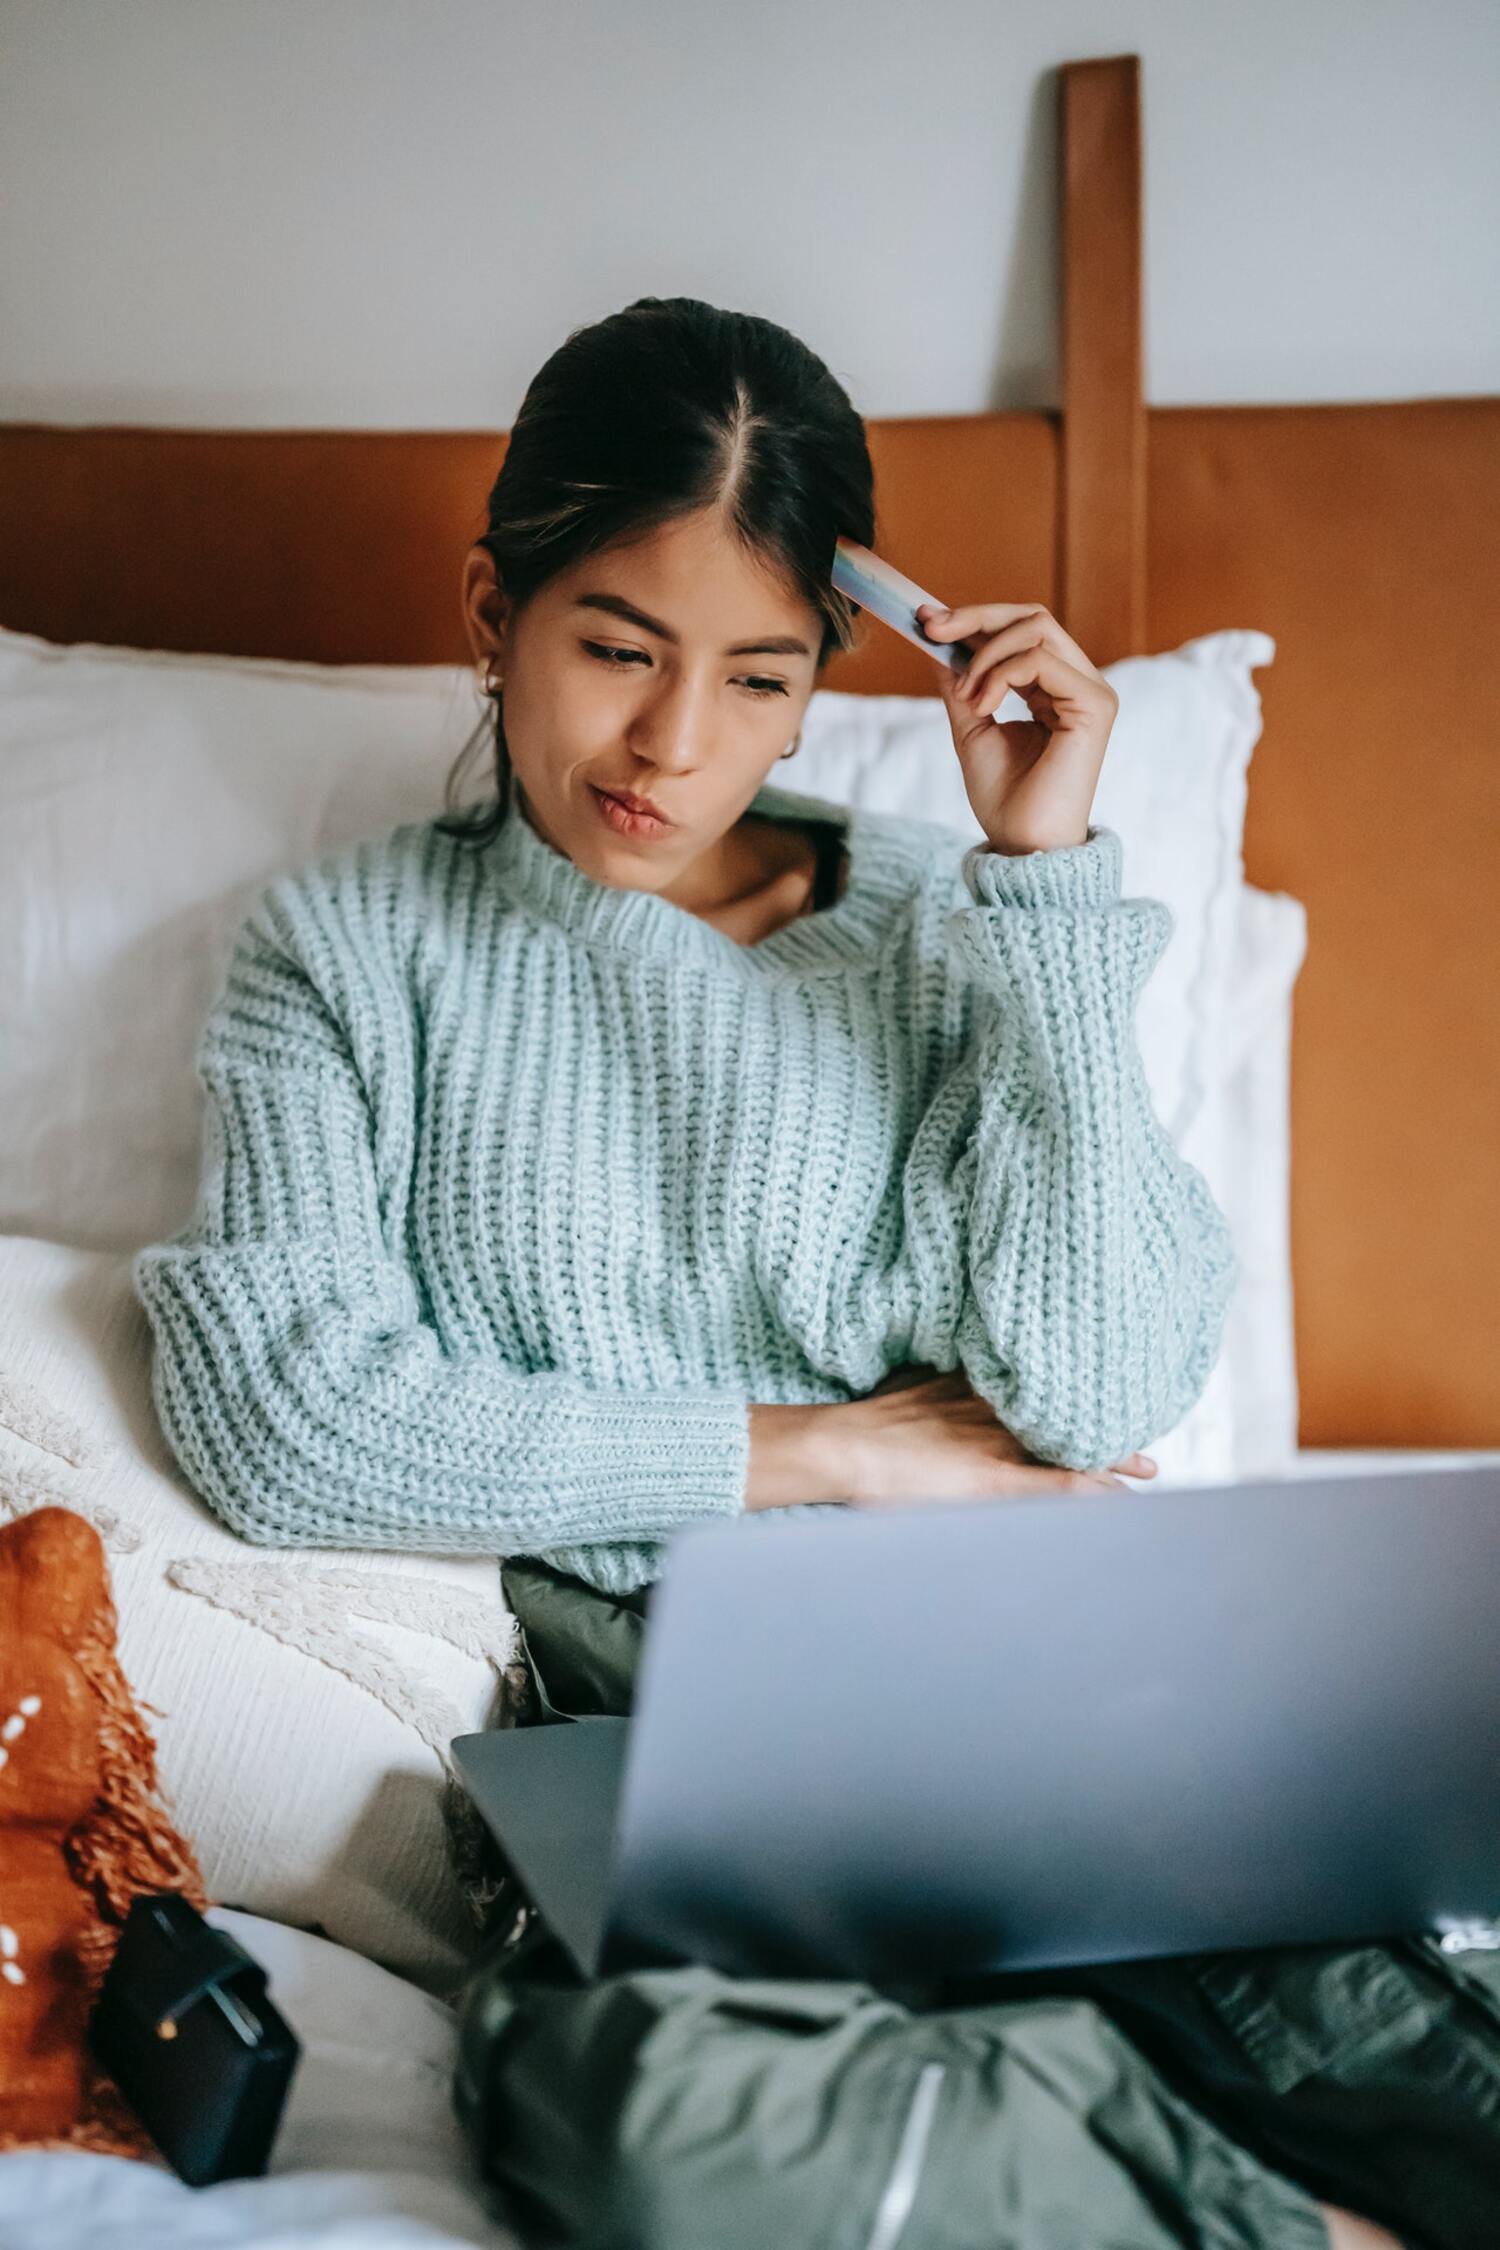 Girl sitting on bed with laptop and credit card thinking